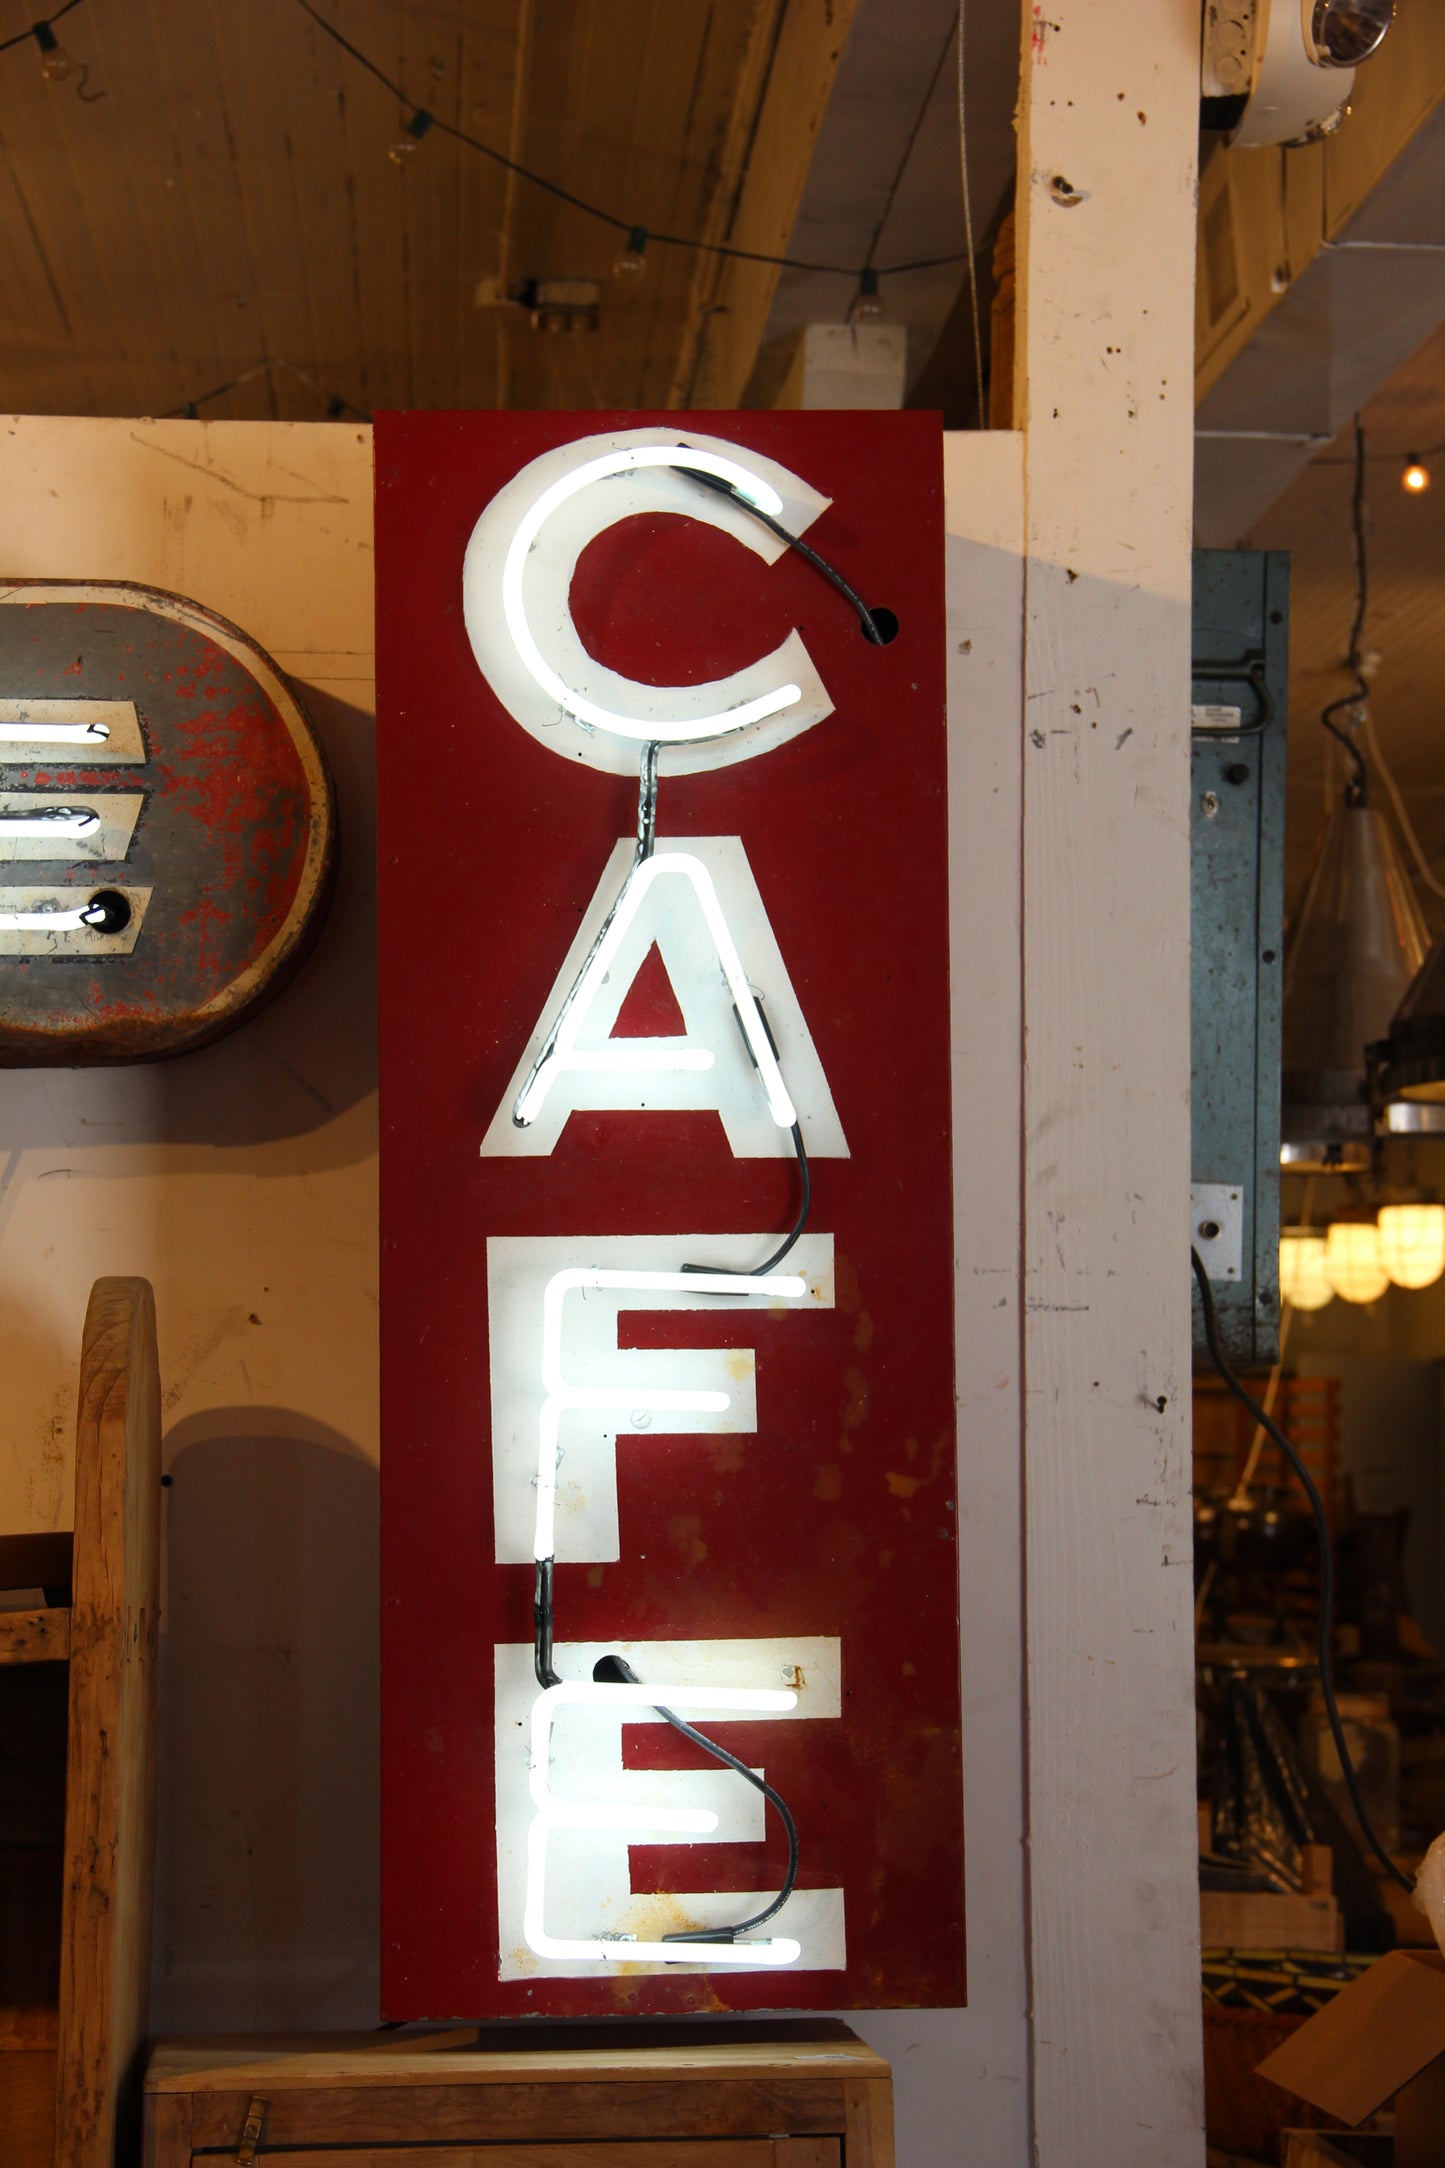 Neon "Cafe" sign-Vertical